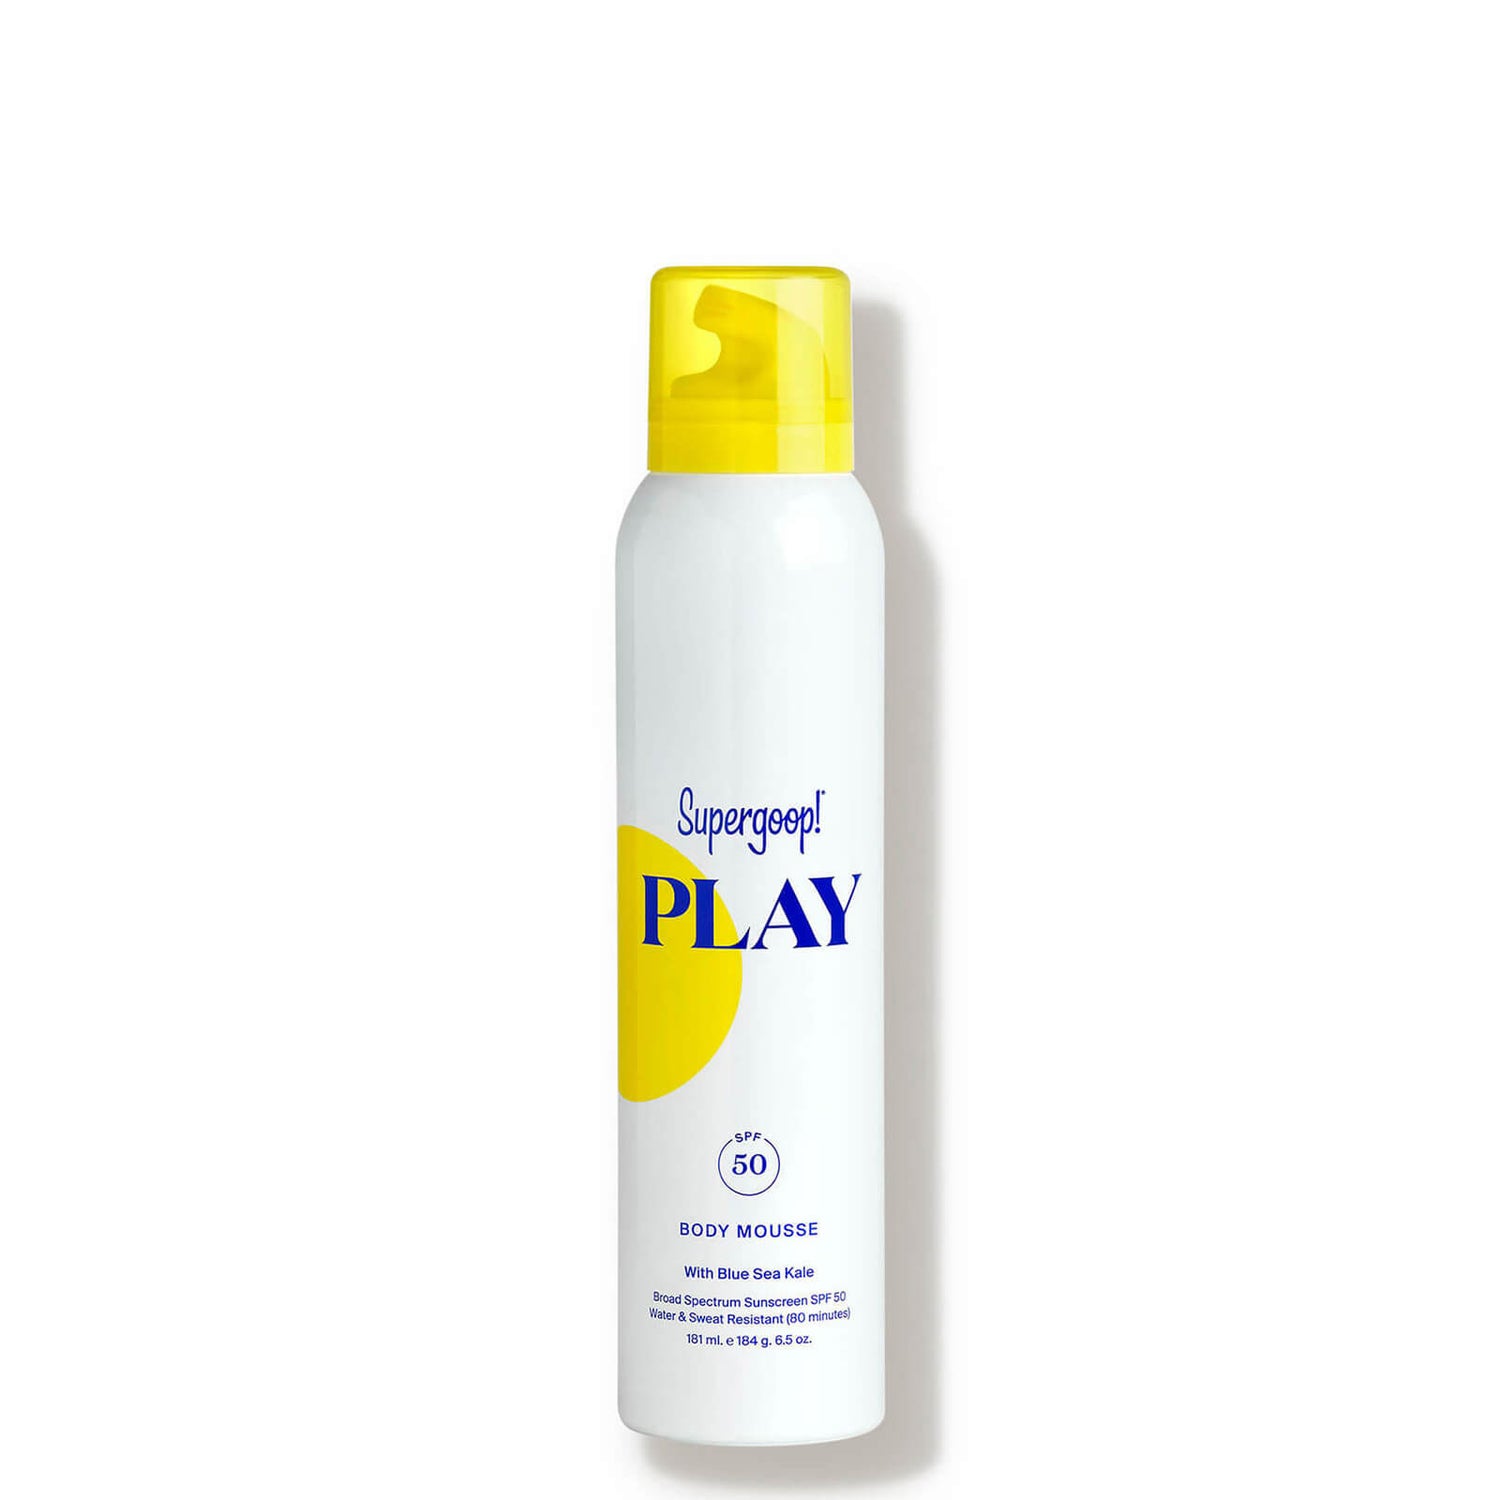 Supergoop!® PLAY Body Mousse SPF 50 with Blue Sea Kale 7.1 oz.